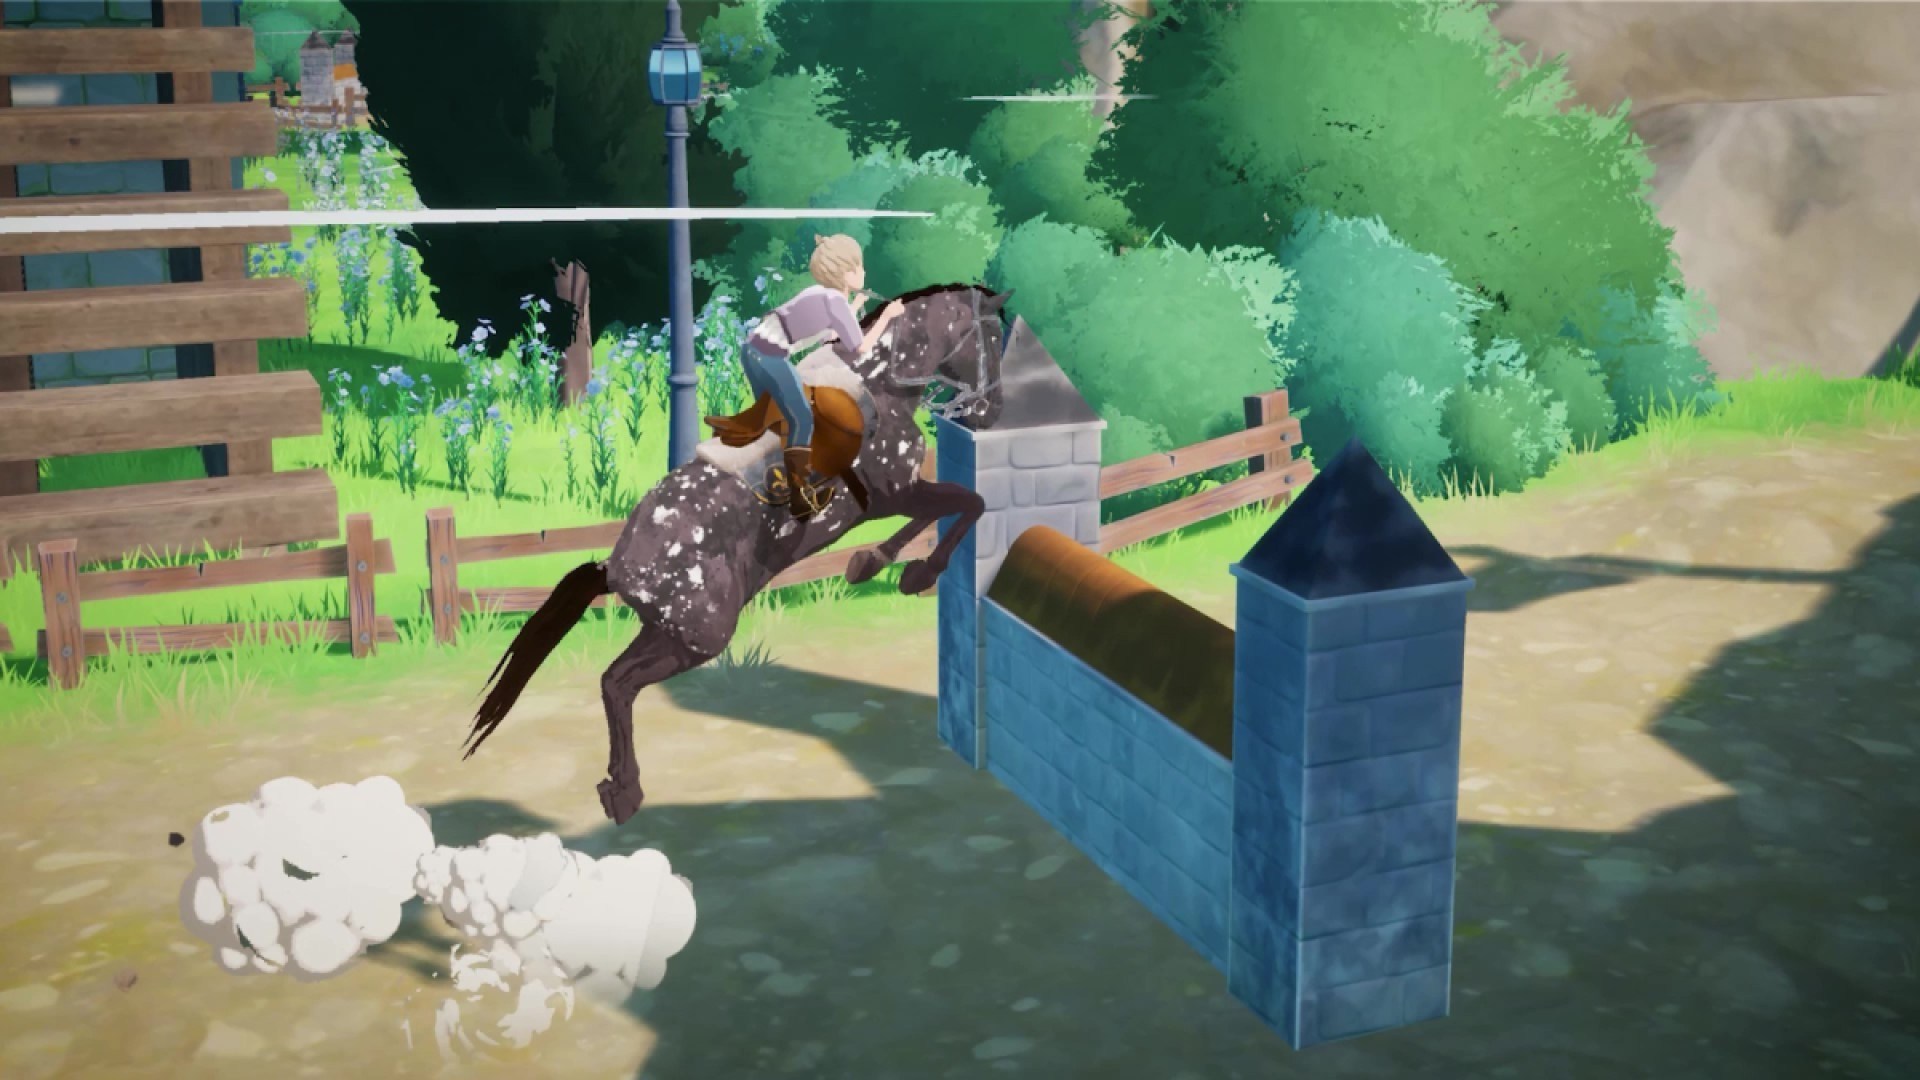 A cool speckled horse jumping in 'Horse Tales'